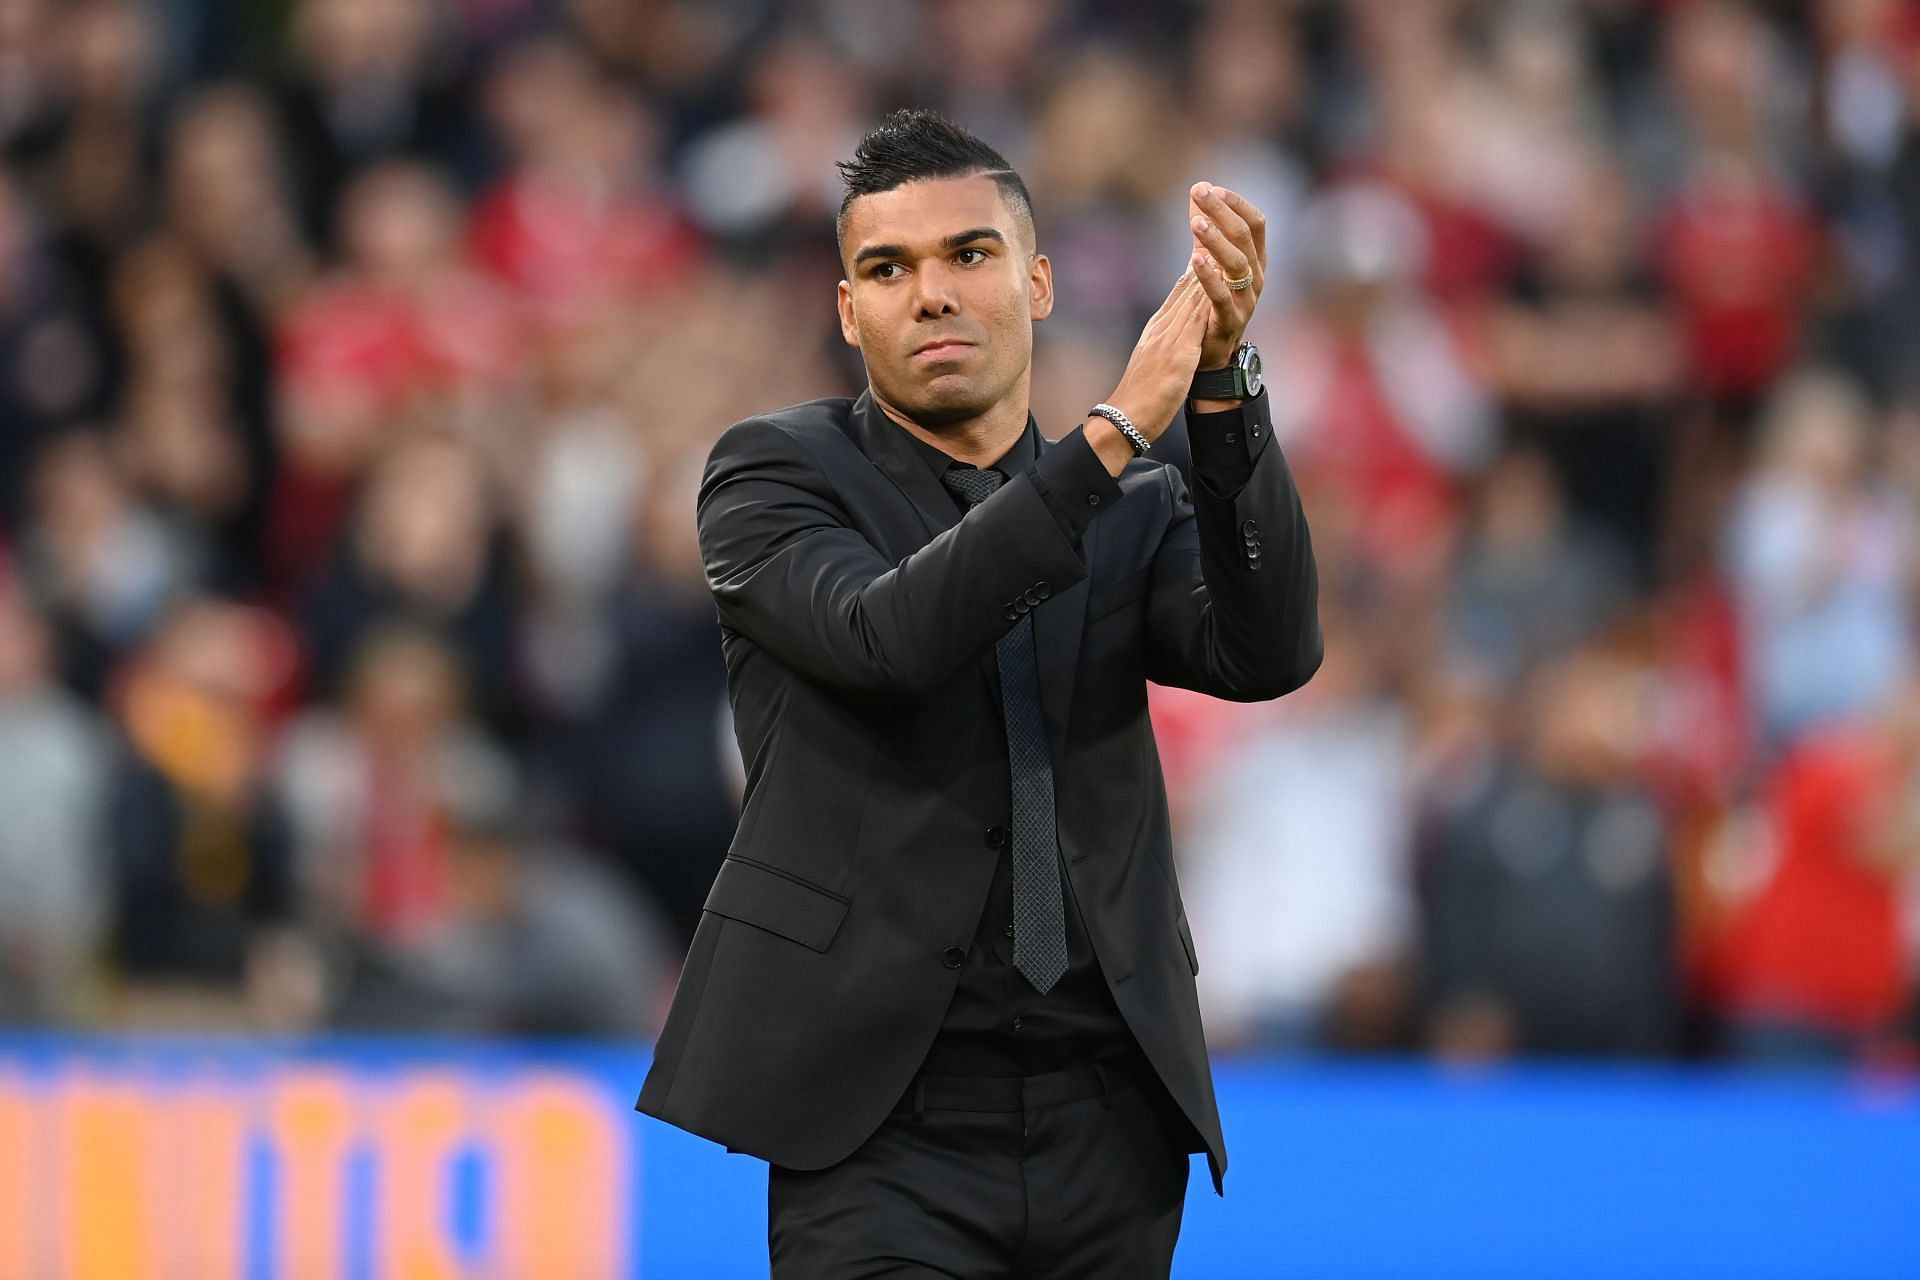 Casemiro could make his debut against the Saints